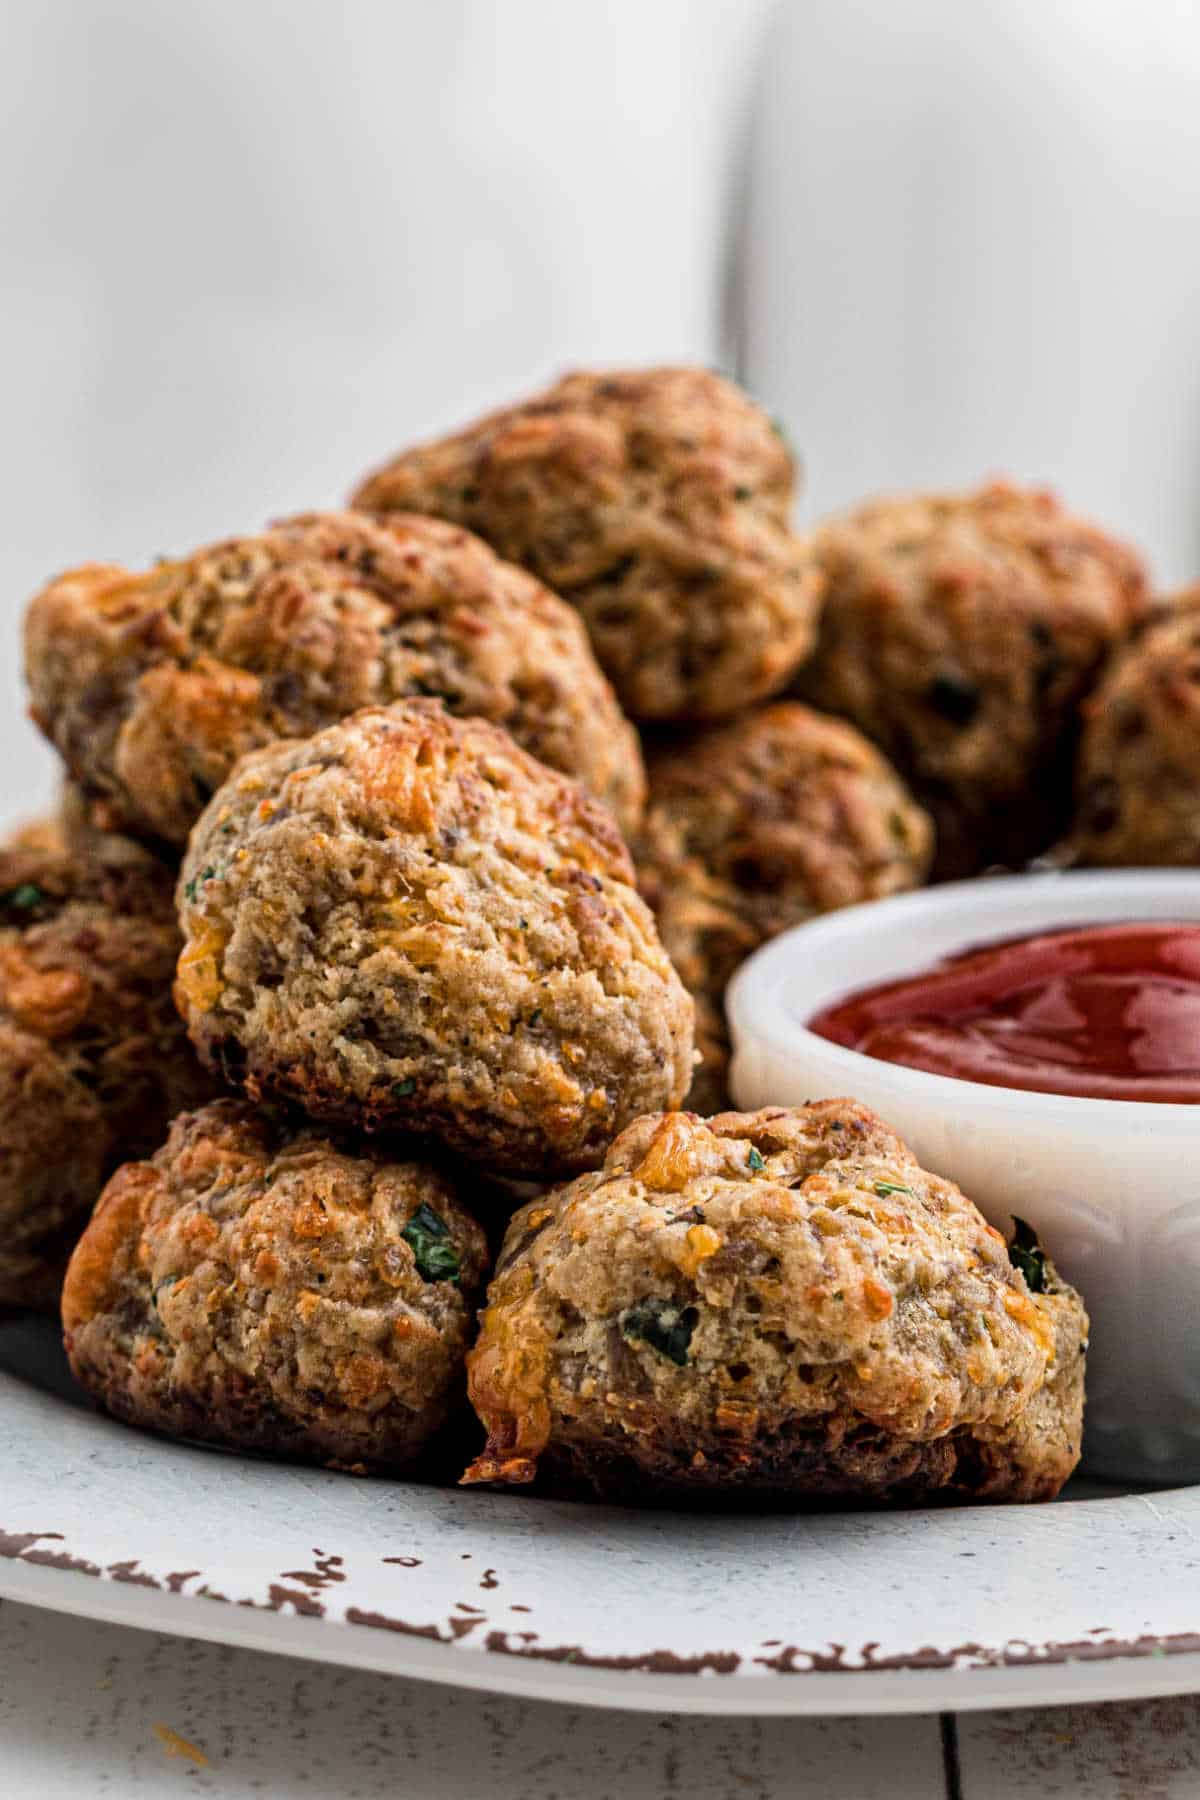 Side view and close up of some sausage balls.